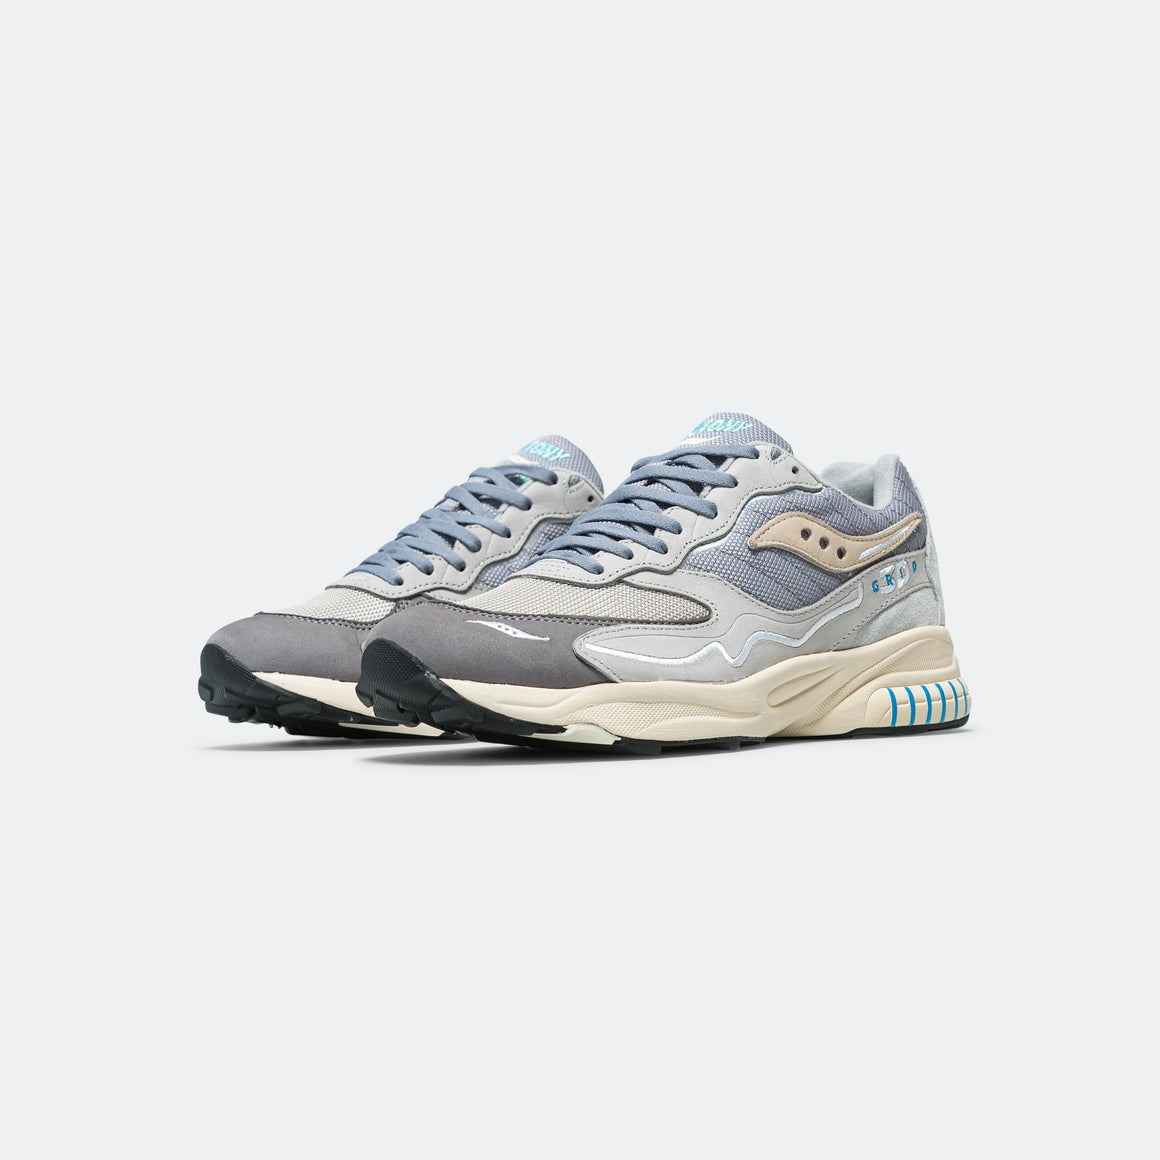 Saucony - 3D Grid Hurricane - Grey/Blue - UP THERE